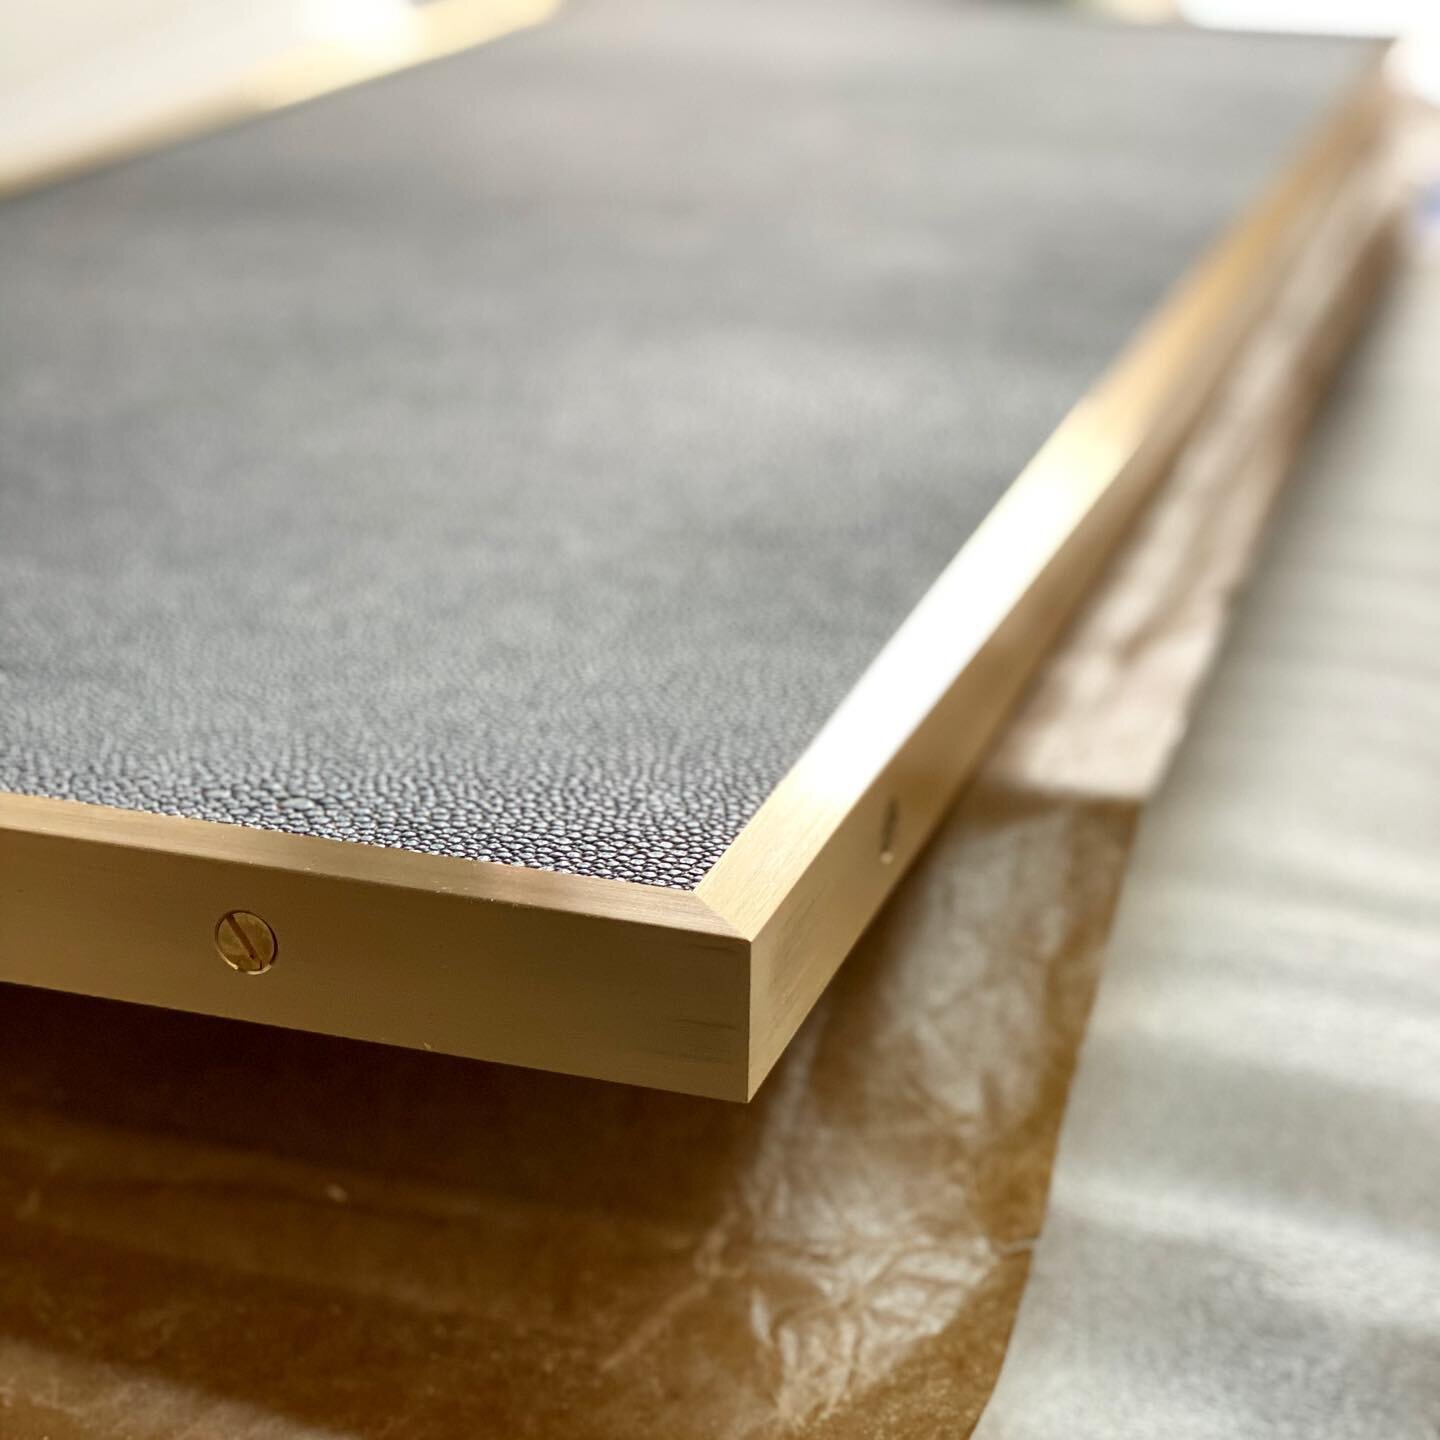 Very unique fabric veneer on these cabinet doors and the brushed brass edge trim fit seamlessly. ....................................................... #sharkskin #parchment #snake #pattern #leather #veneers #edge #trim #satin #brushed #brass